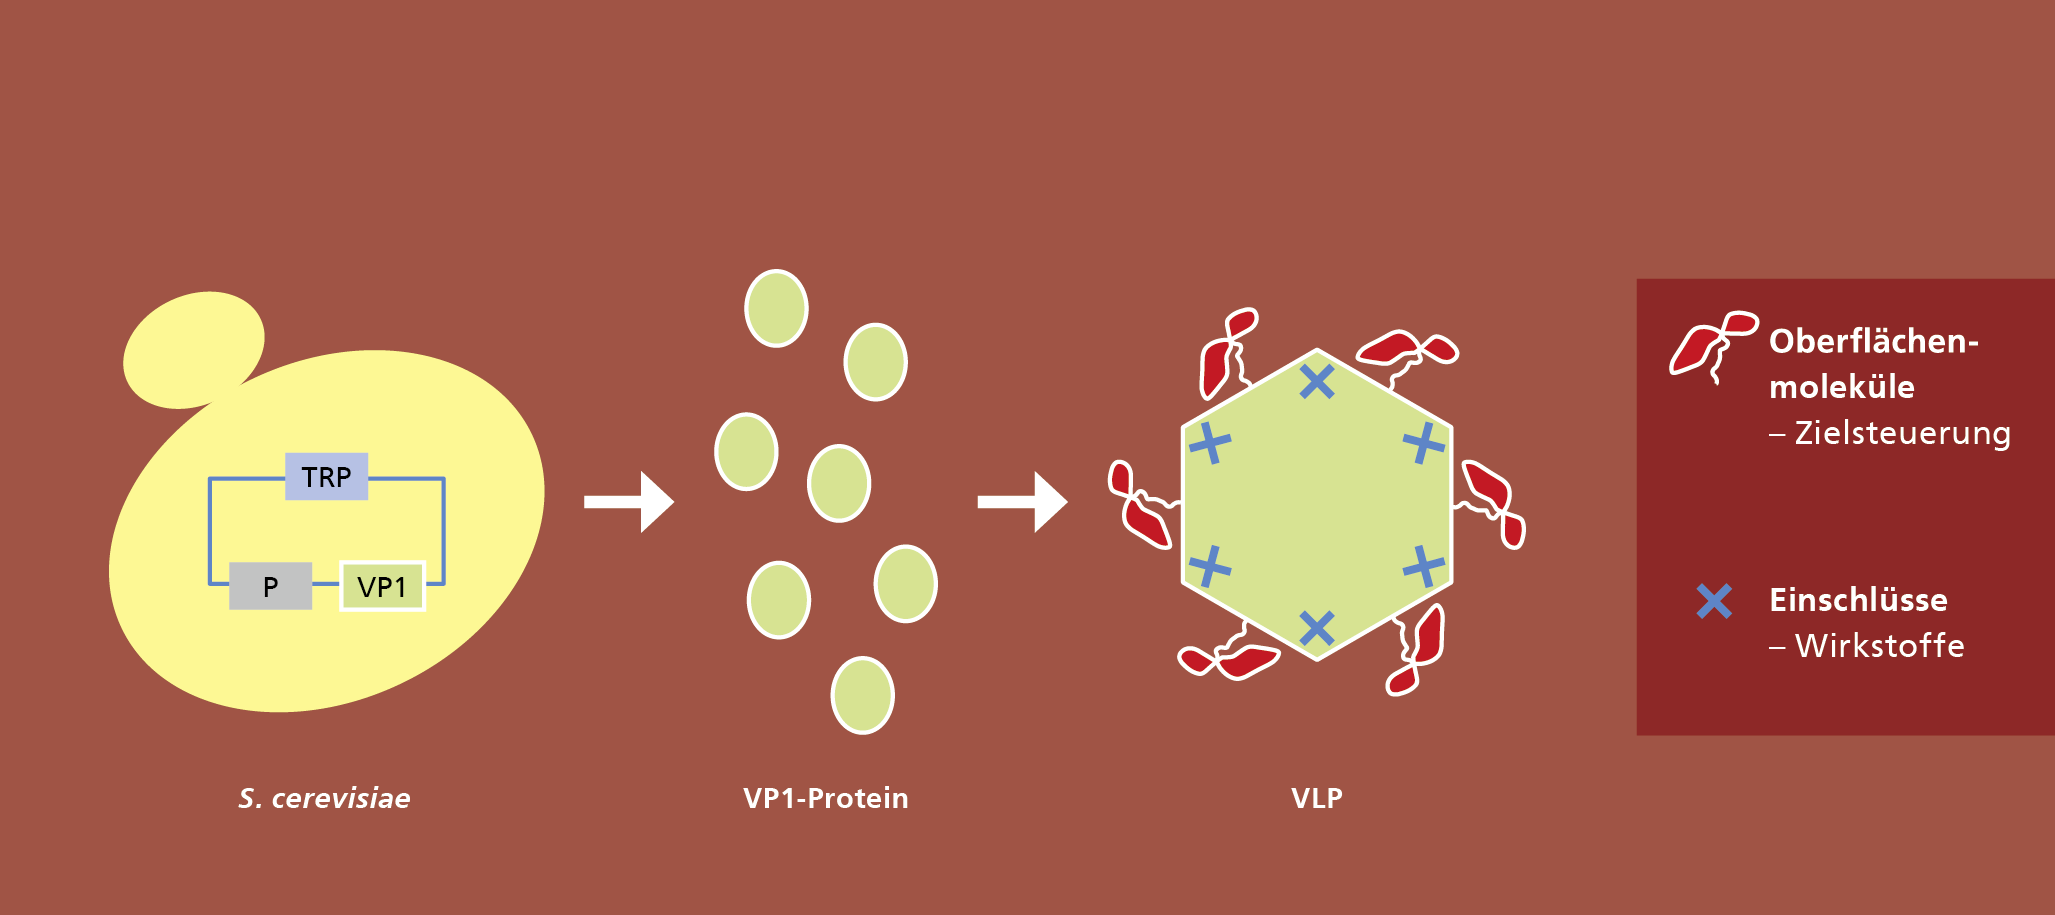 Platform technology for producing virus-like particles (VLPs).